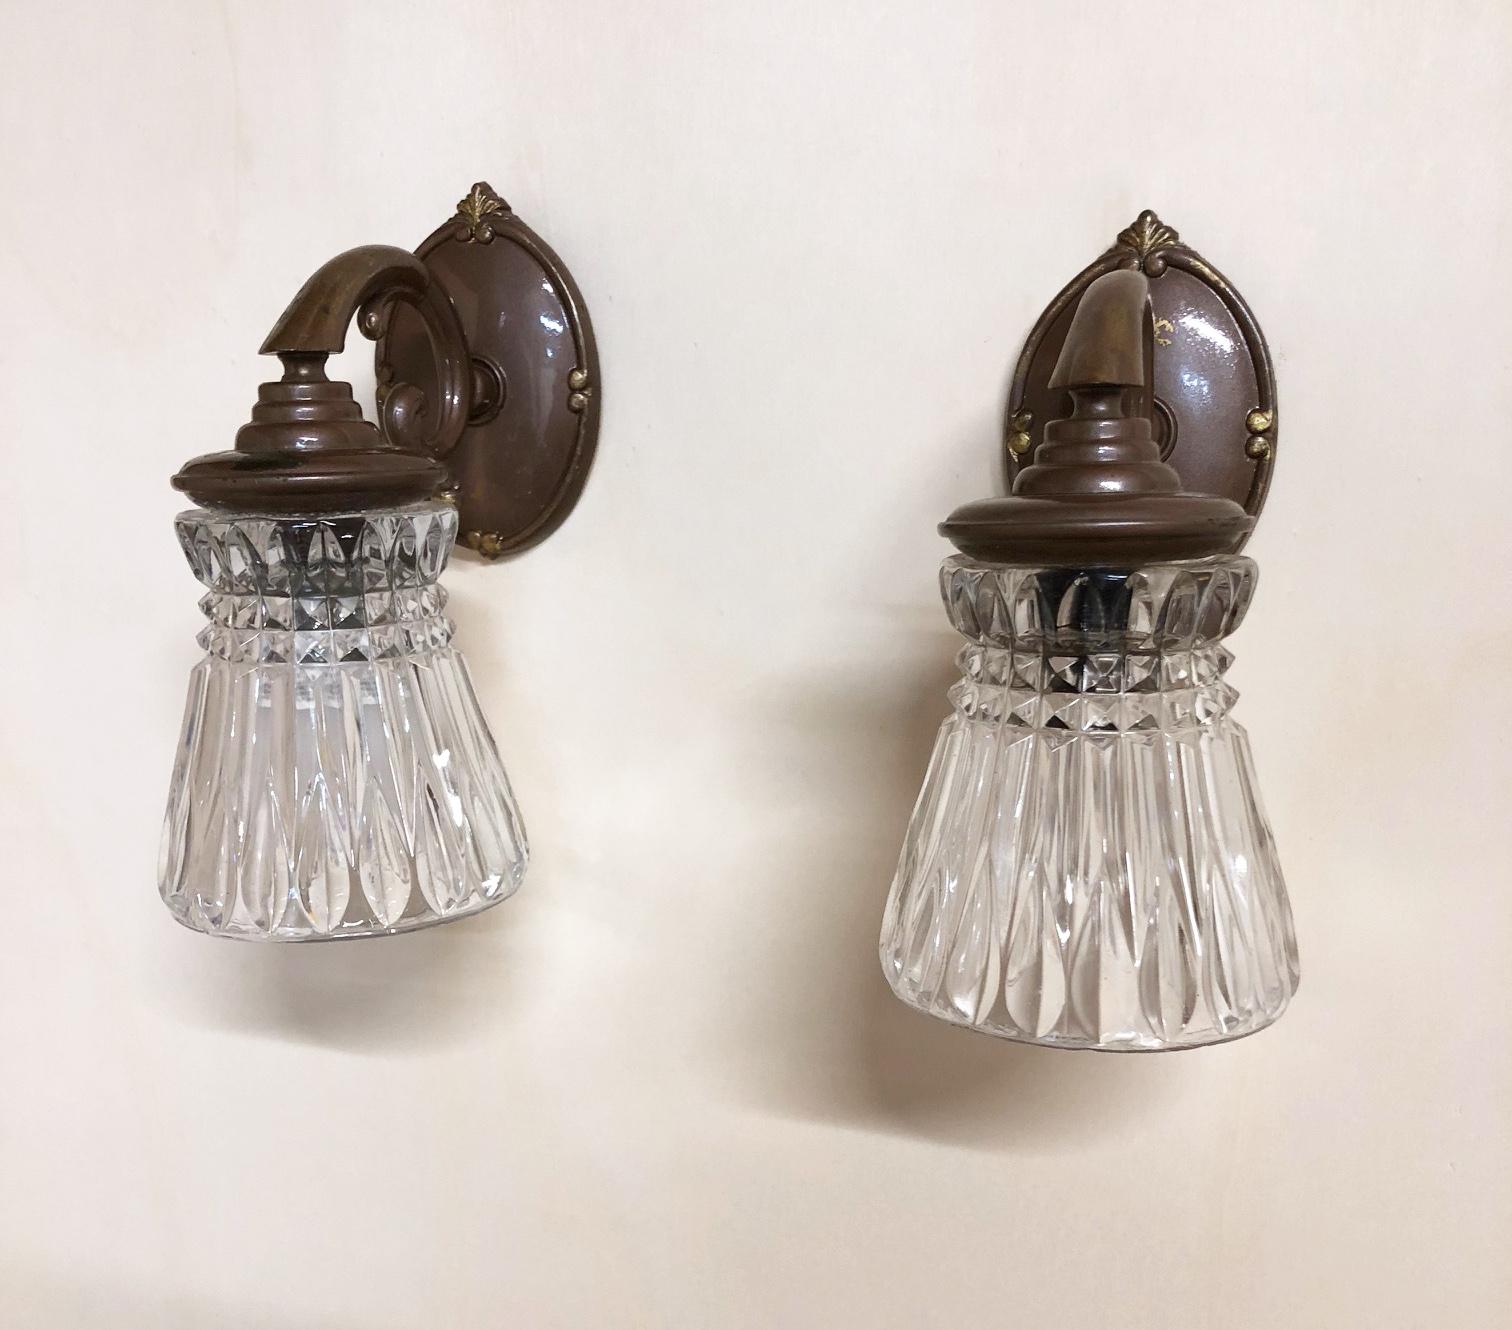 Pair of Original 1970s Italian Brass Wall Lamps, Bronzed Color 10